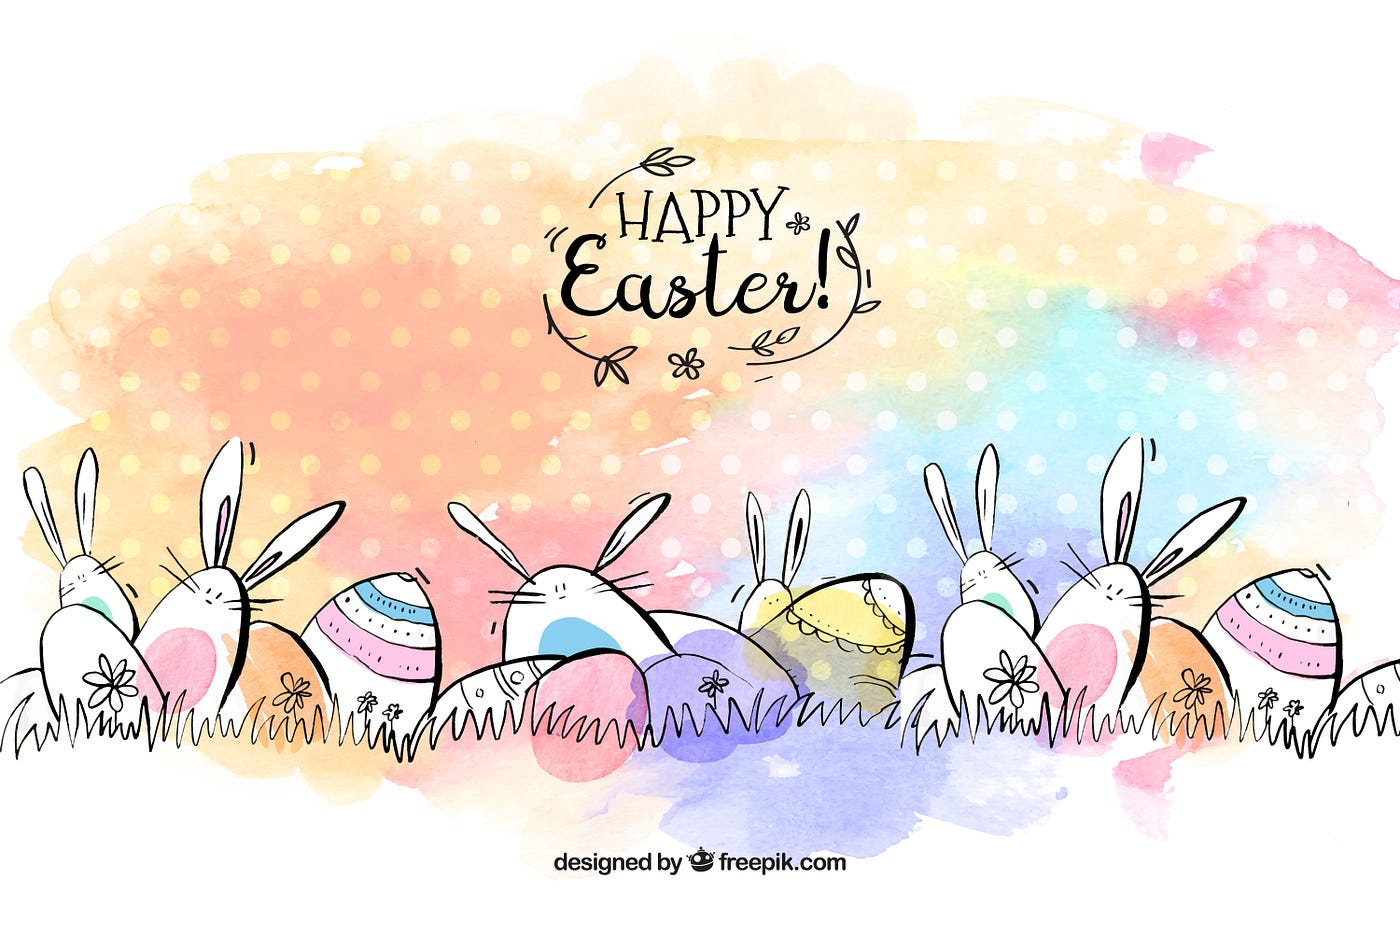 30 Amazing Easter Cards For Friends And Family, by Vectr, Vectr